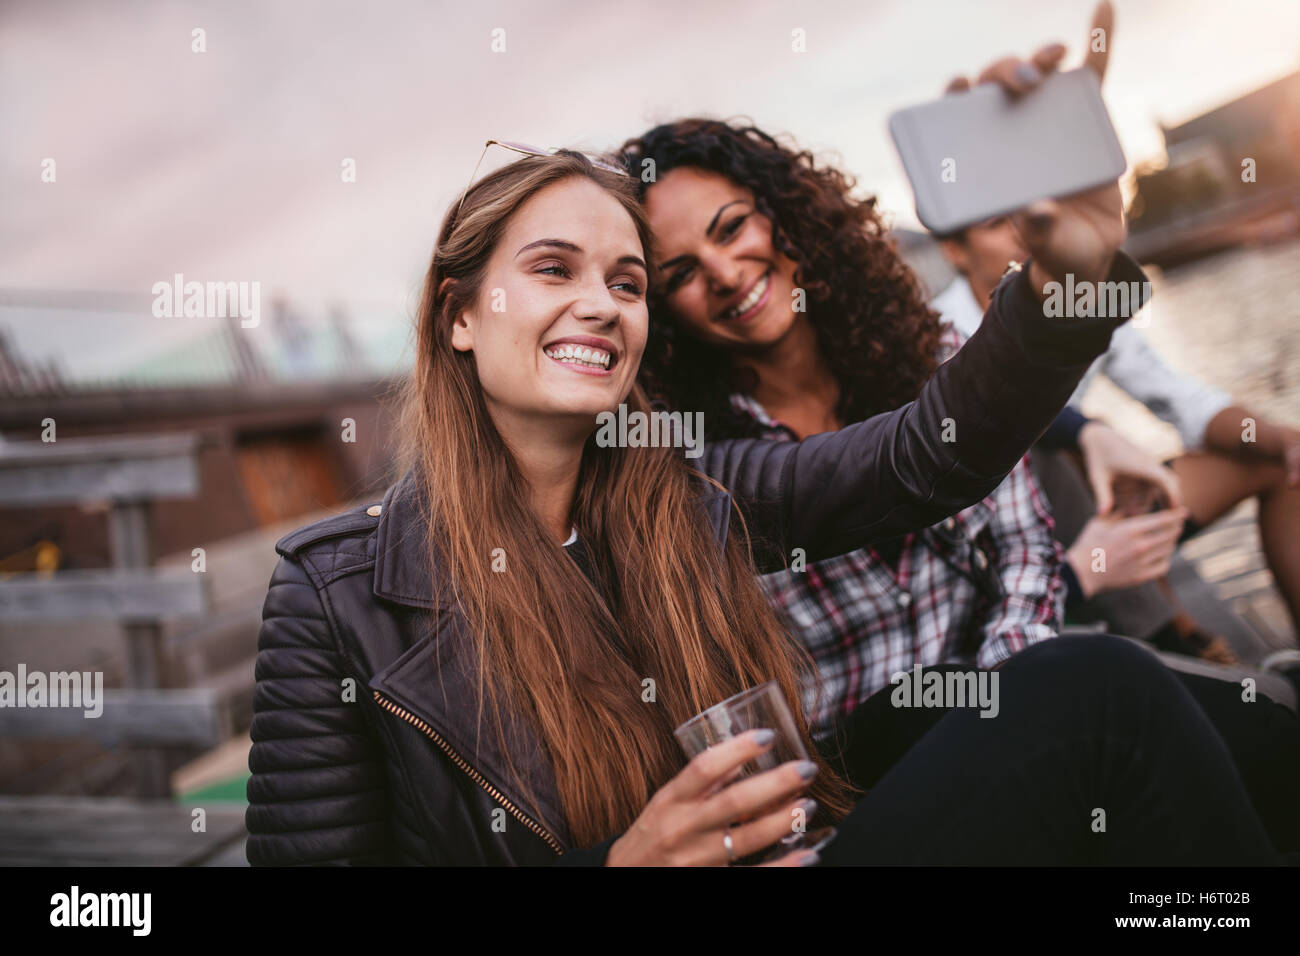 Friends taking a self portrait with smart phone near the lake. Cheerful two young women taking selfie with mobile phone. Stock Photo